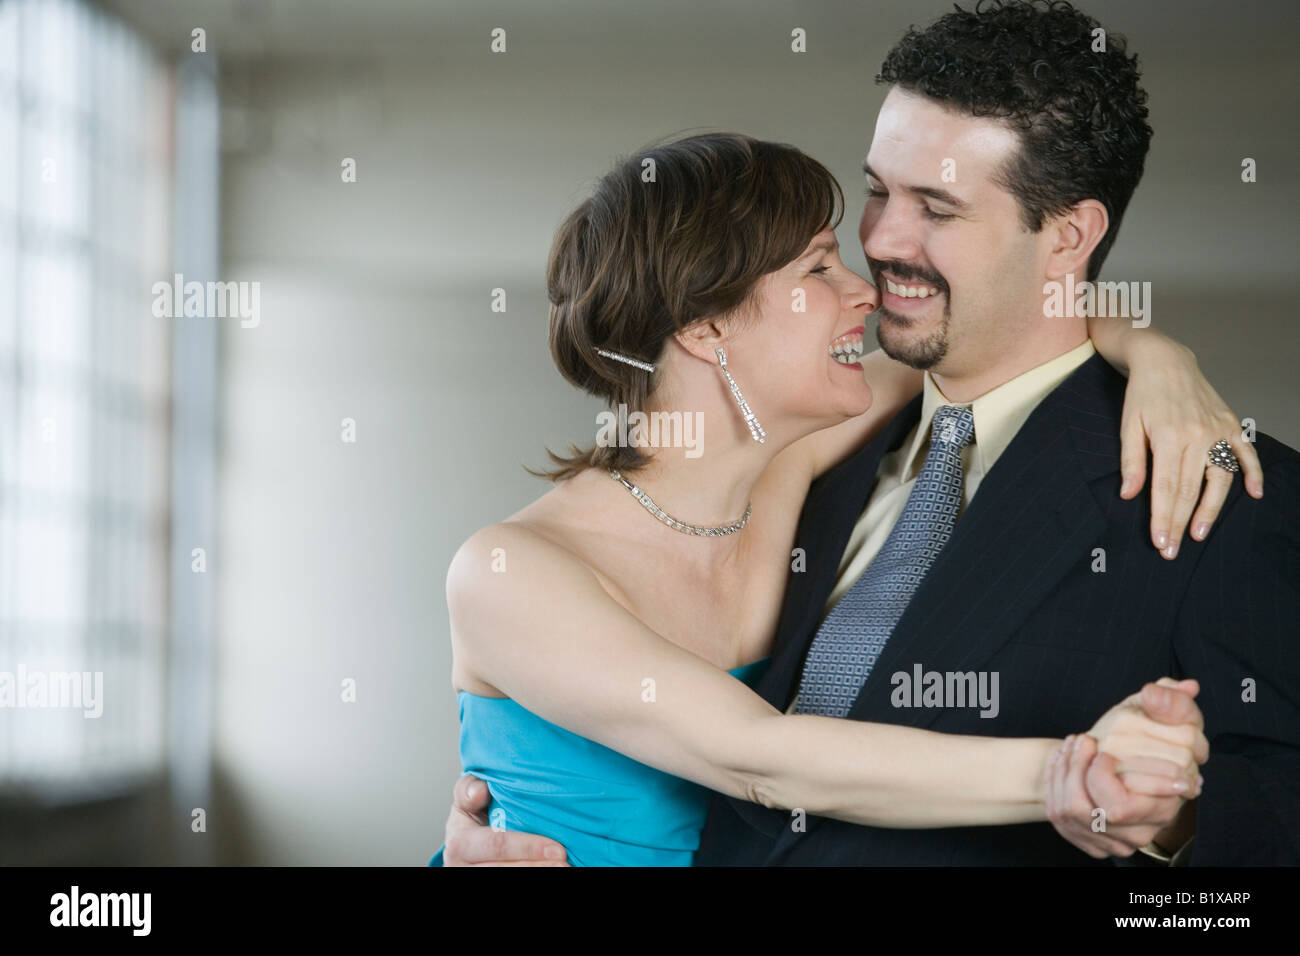 Close-up of a young couple dancing Banque D'Images